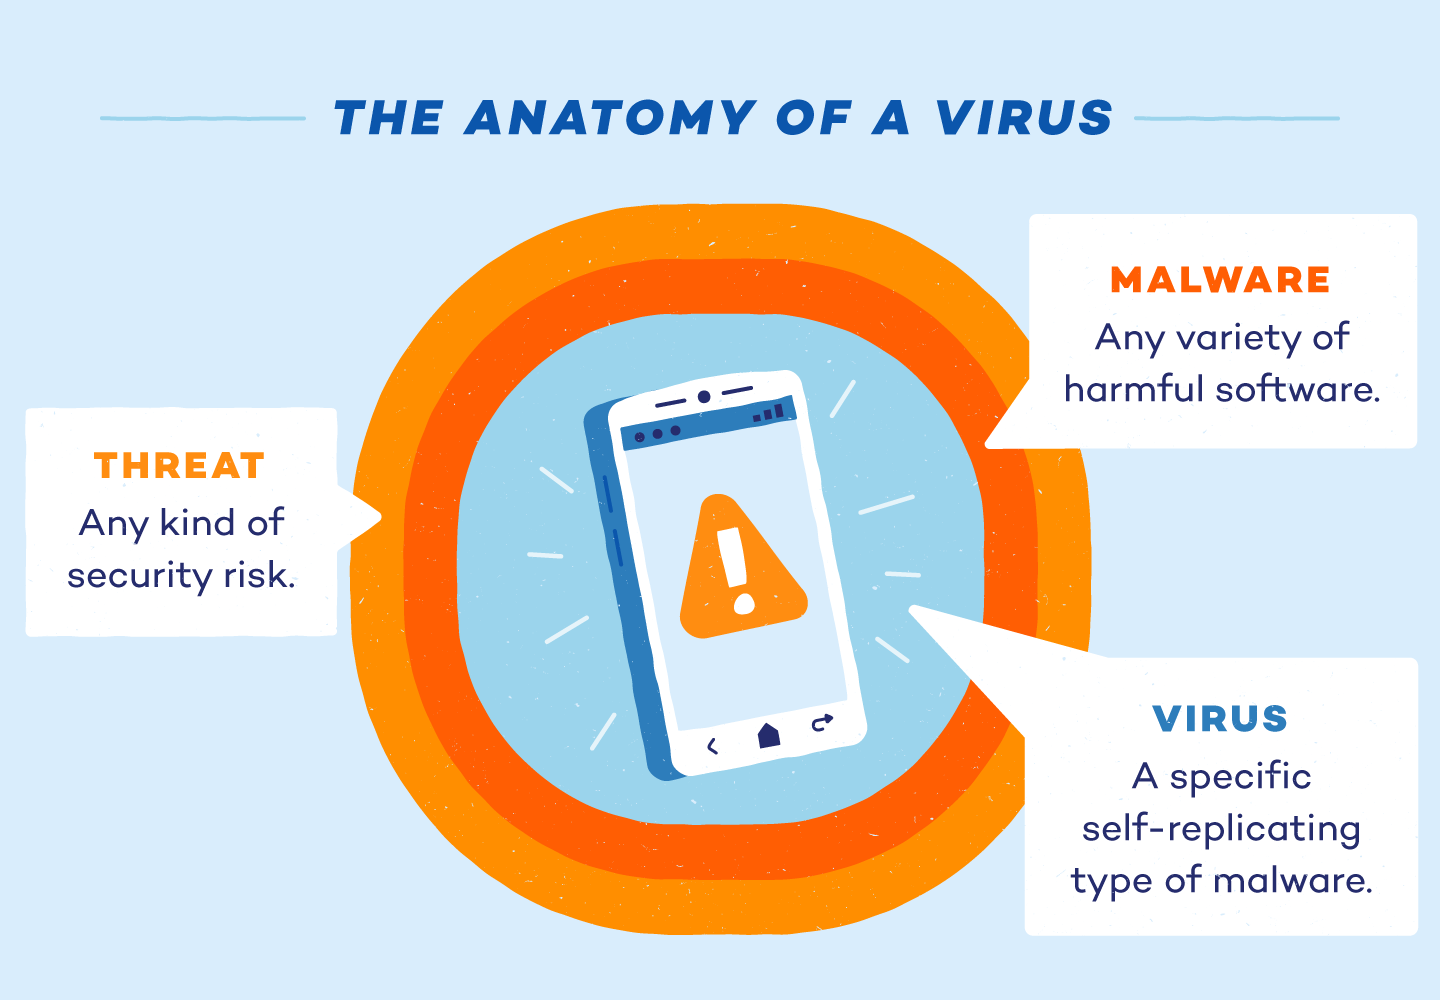 install virus on your own cell phone to infect any hackers